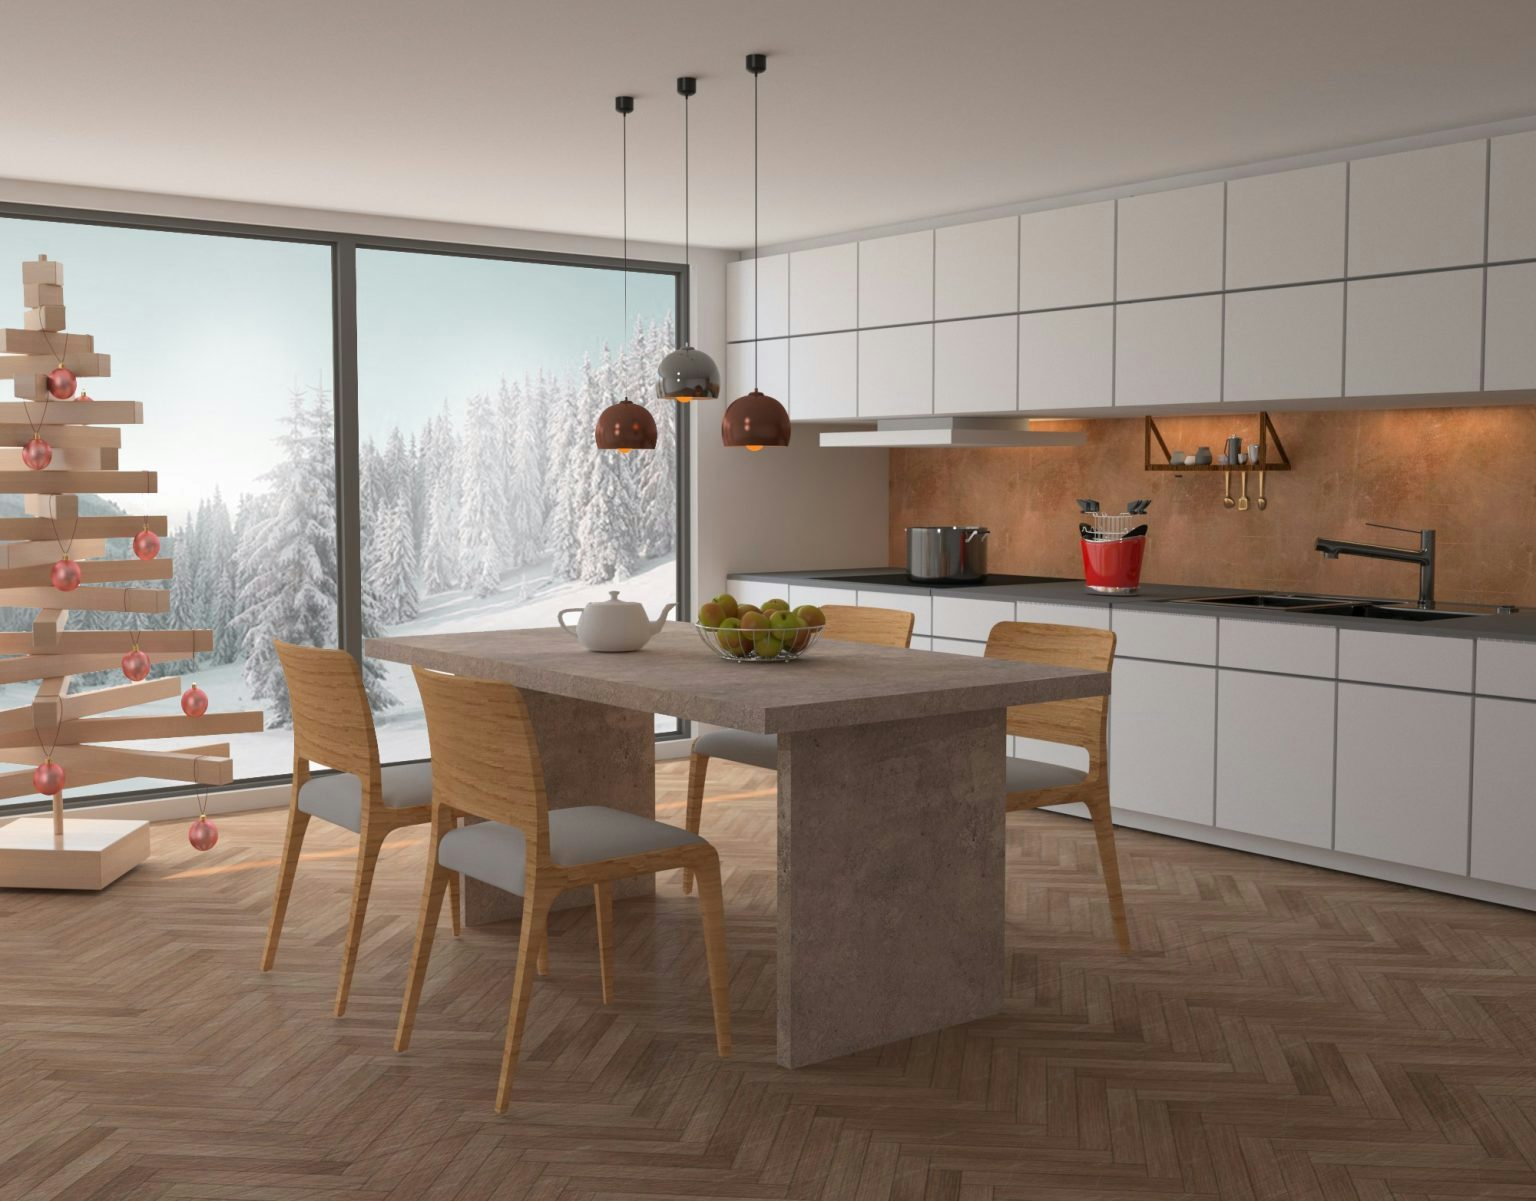 White kitchen elements and wooden dining table with chairs in the kitchen near the huge window looking at the mountain scenery